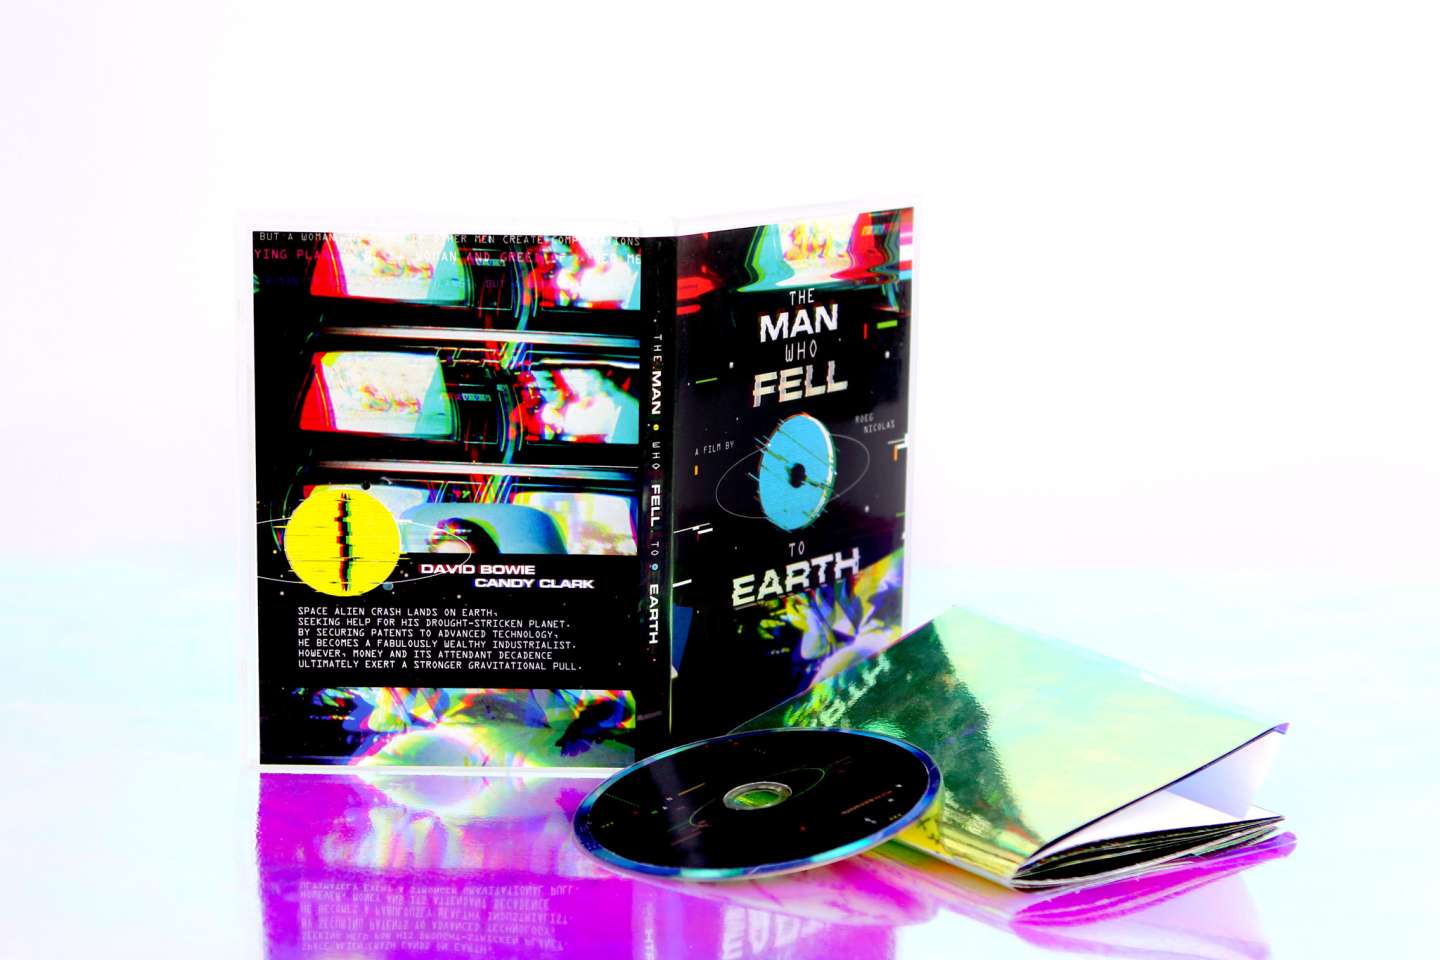 The Man Who Fell to Earth DVD Packaging